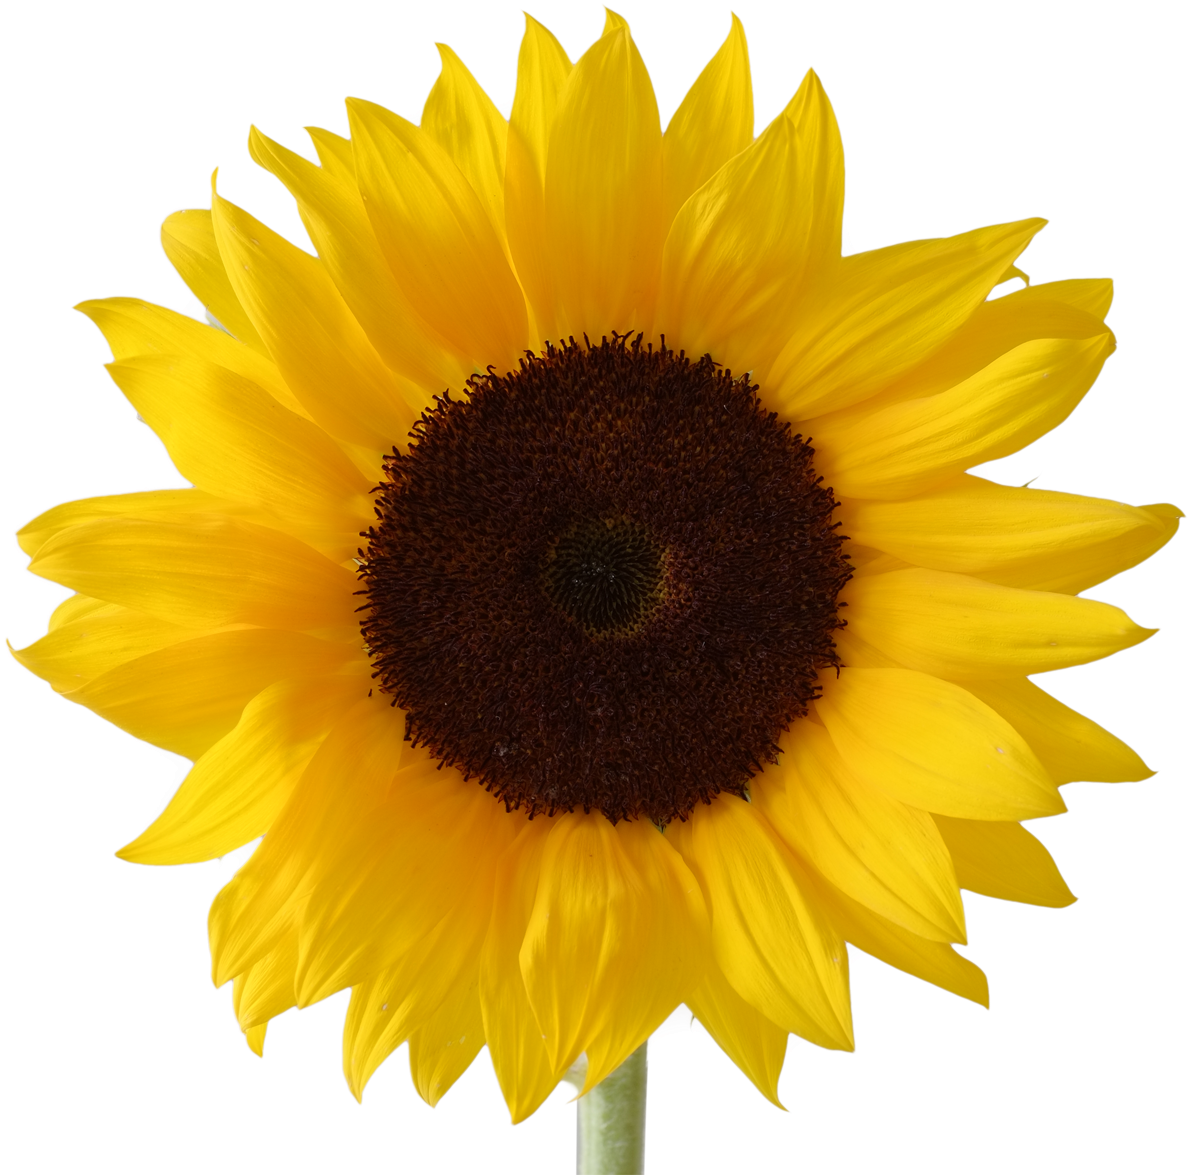 Download Sunflower Vector Free at Vectorified.com | Collection of ...